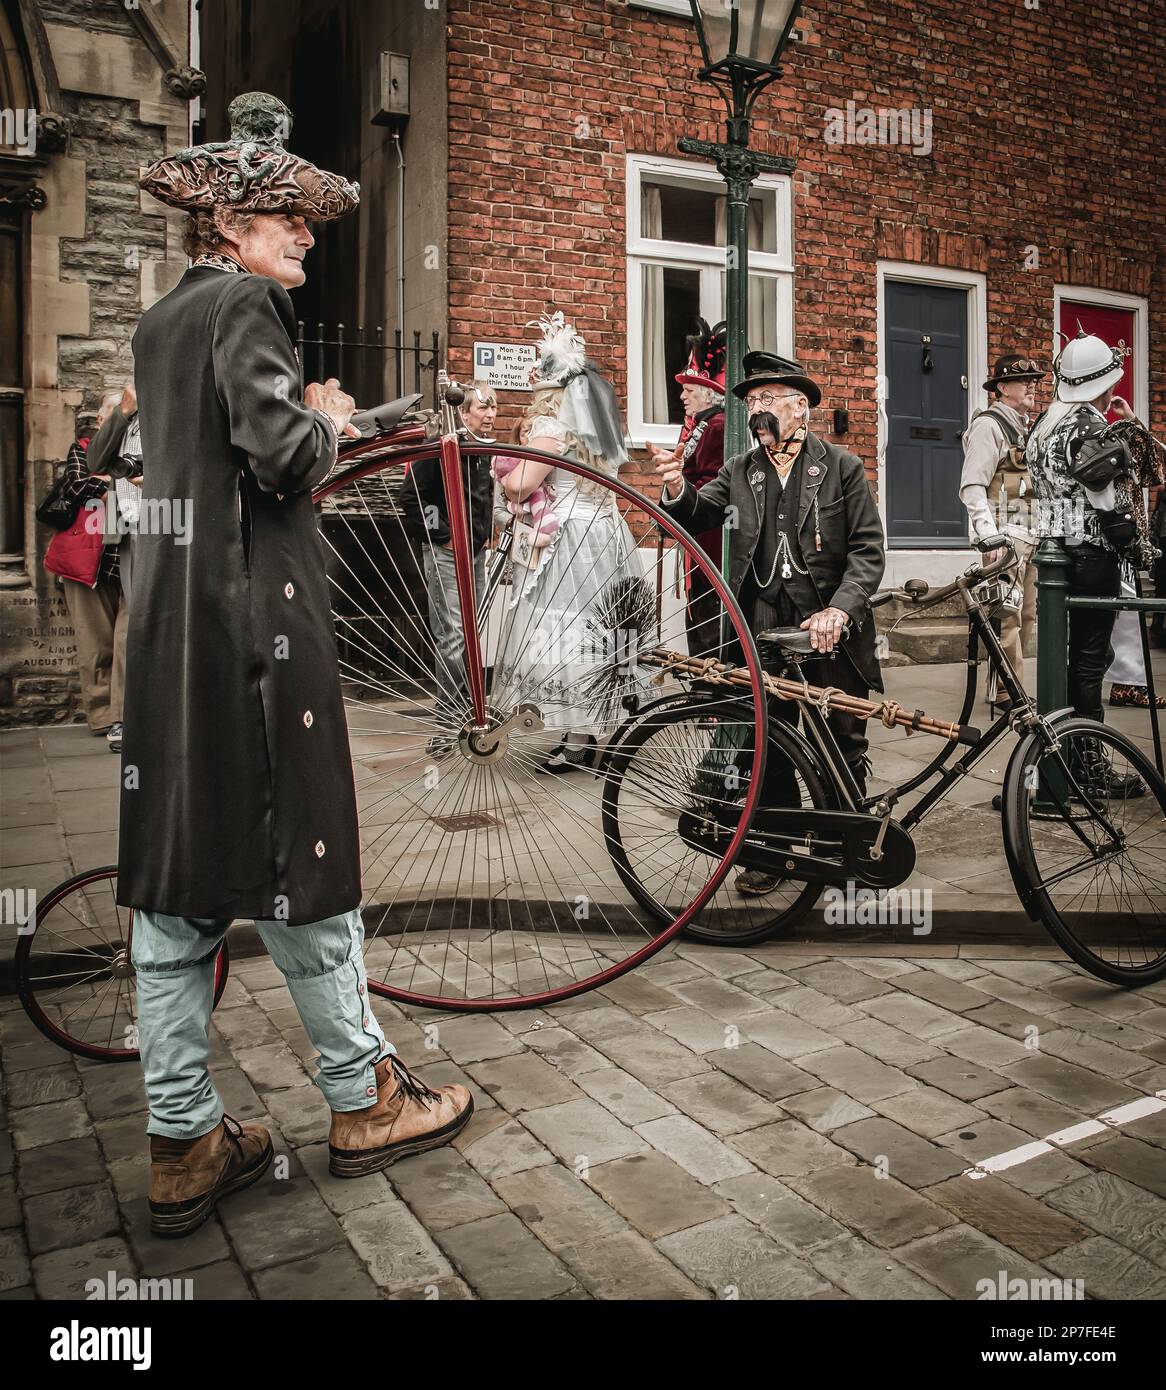 A Victorian chimney sweep and a man with a penny farthing feature in this surreal retro futuristic street scene. Stock Photo